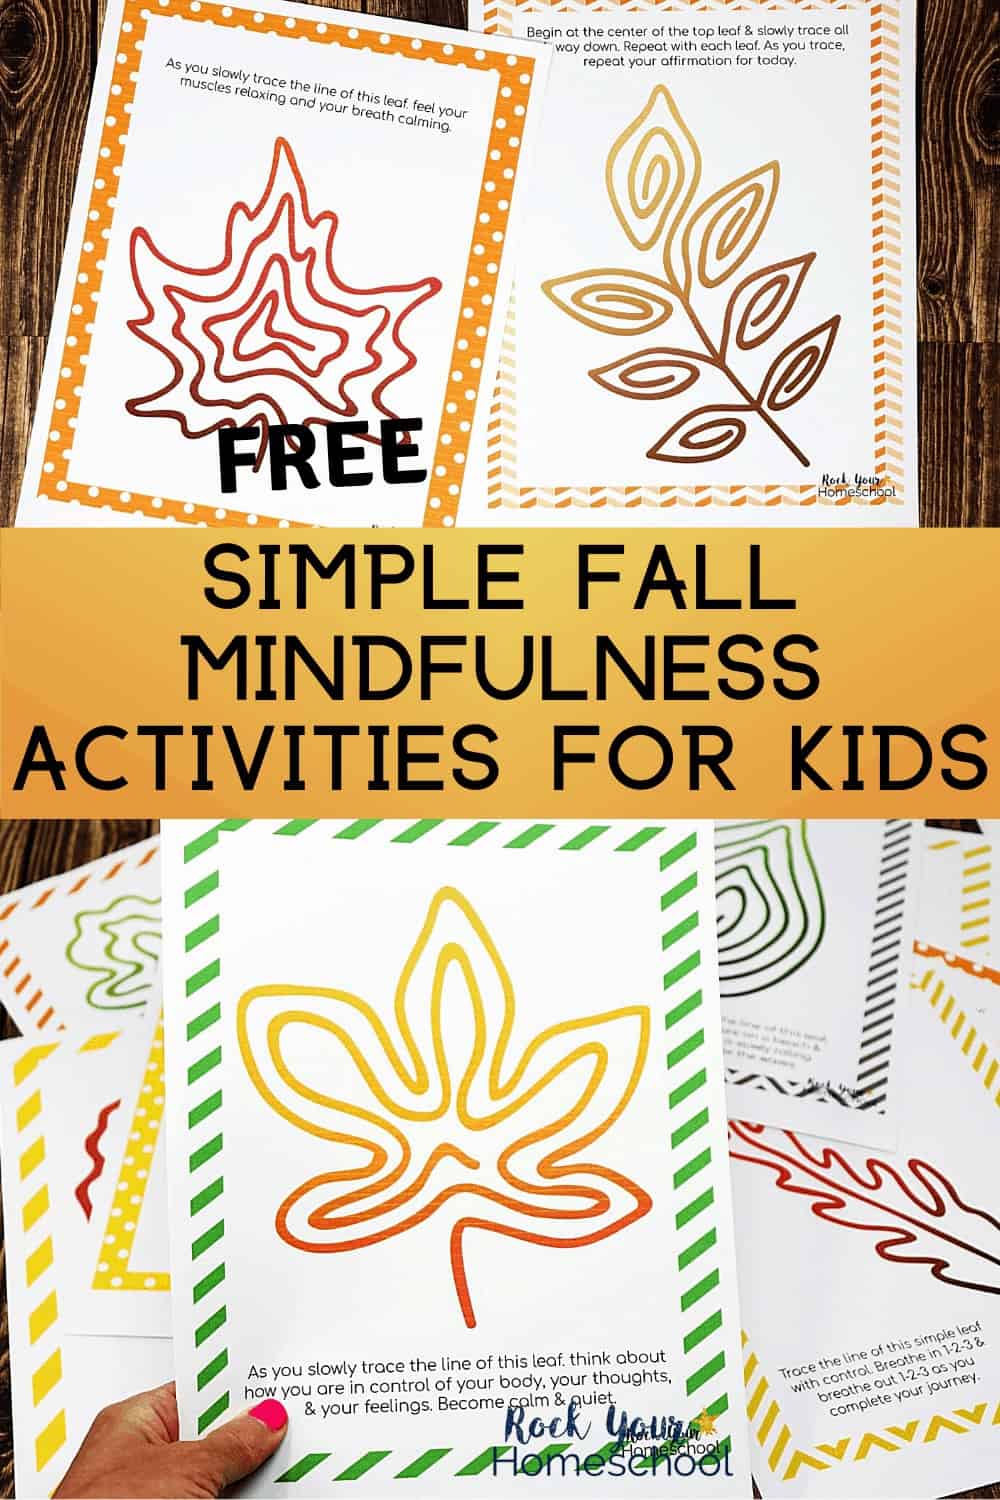 Free & Simple Fall Mindfulness Activities for Kids